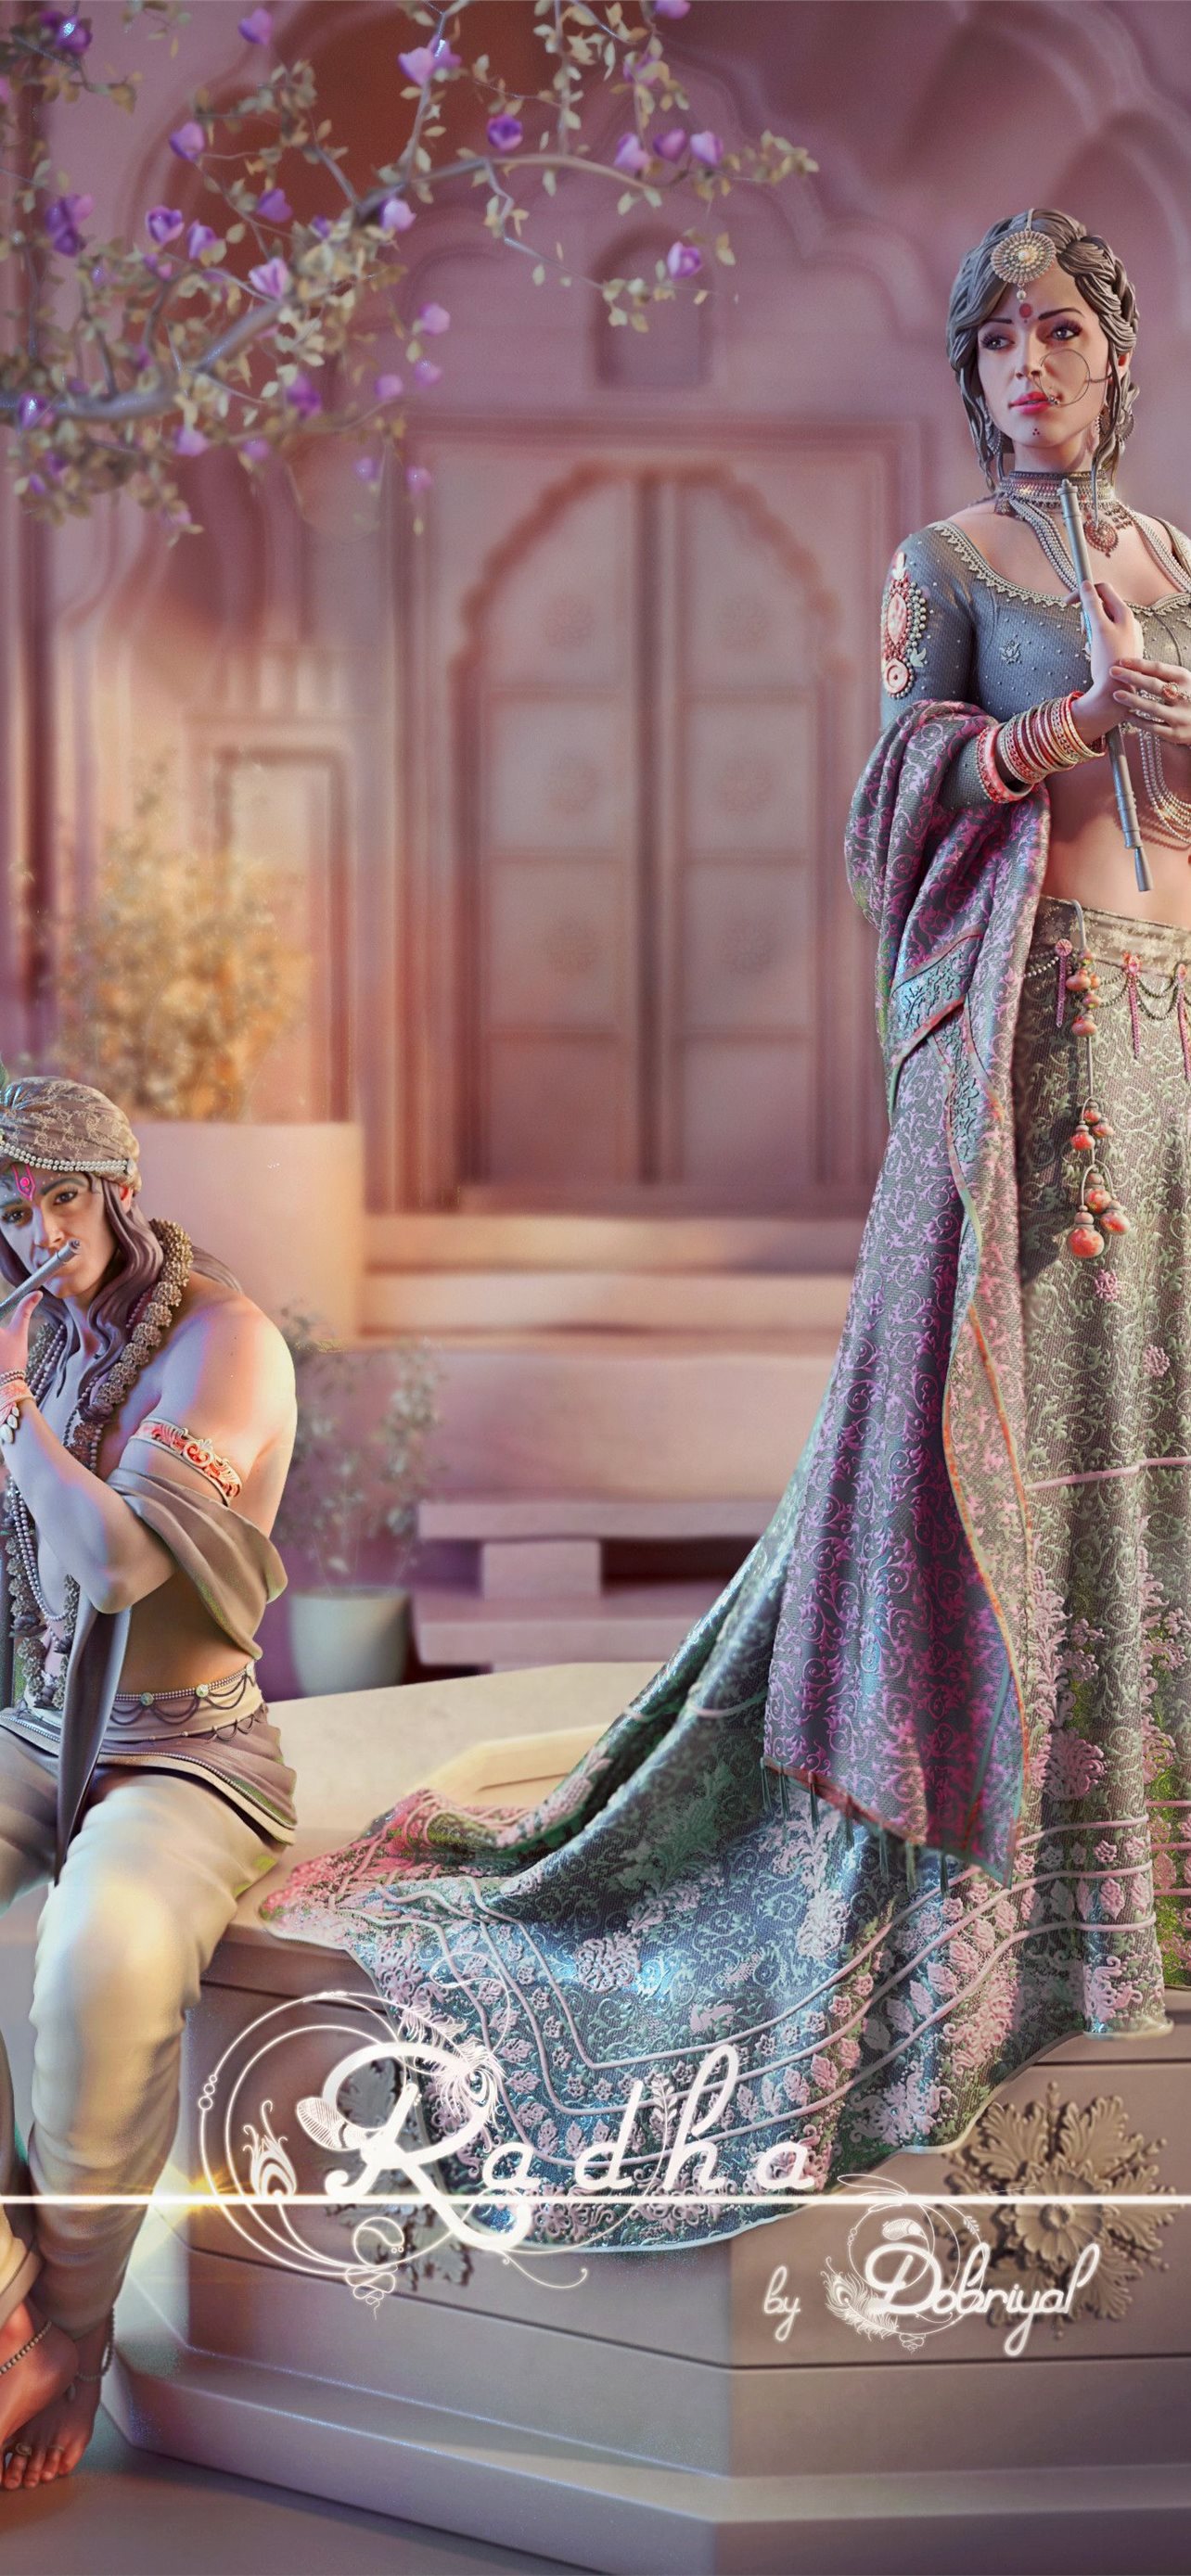 3d Radha Krishna Wallpaper For Android Image Num 51